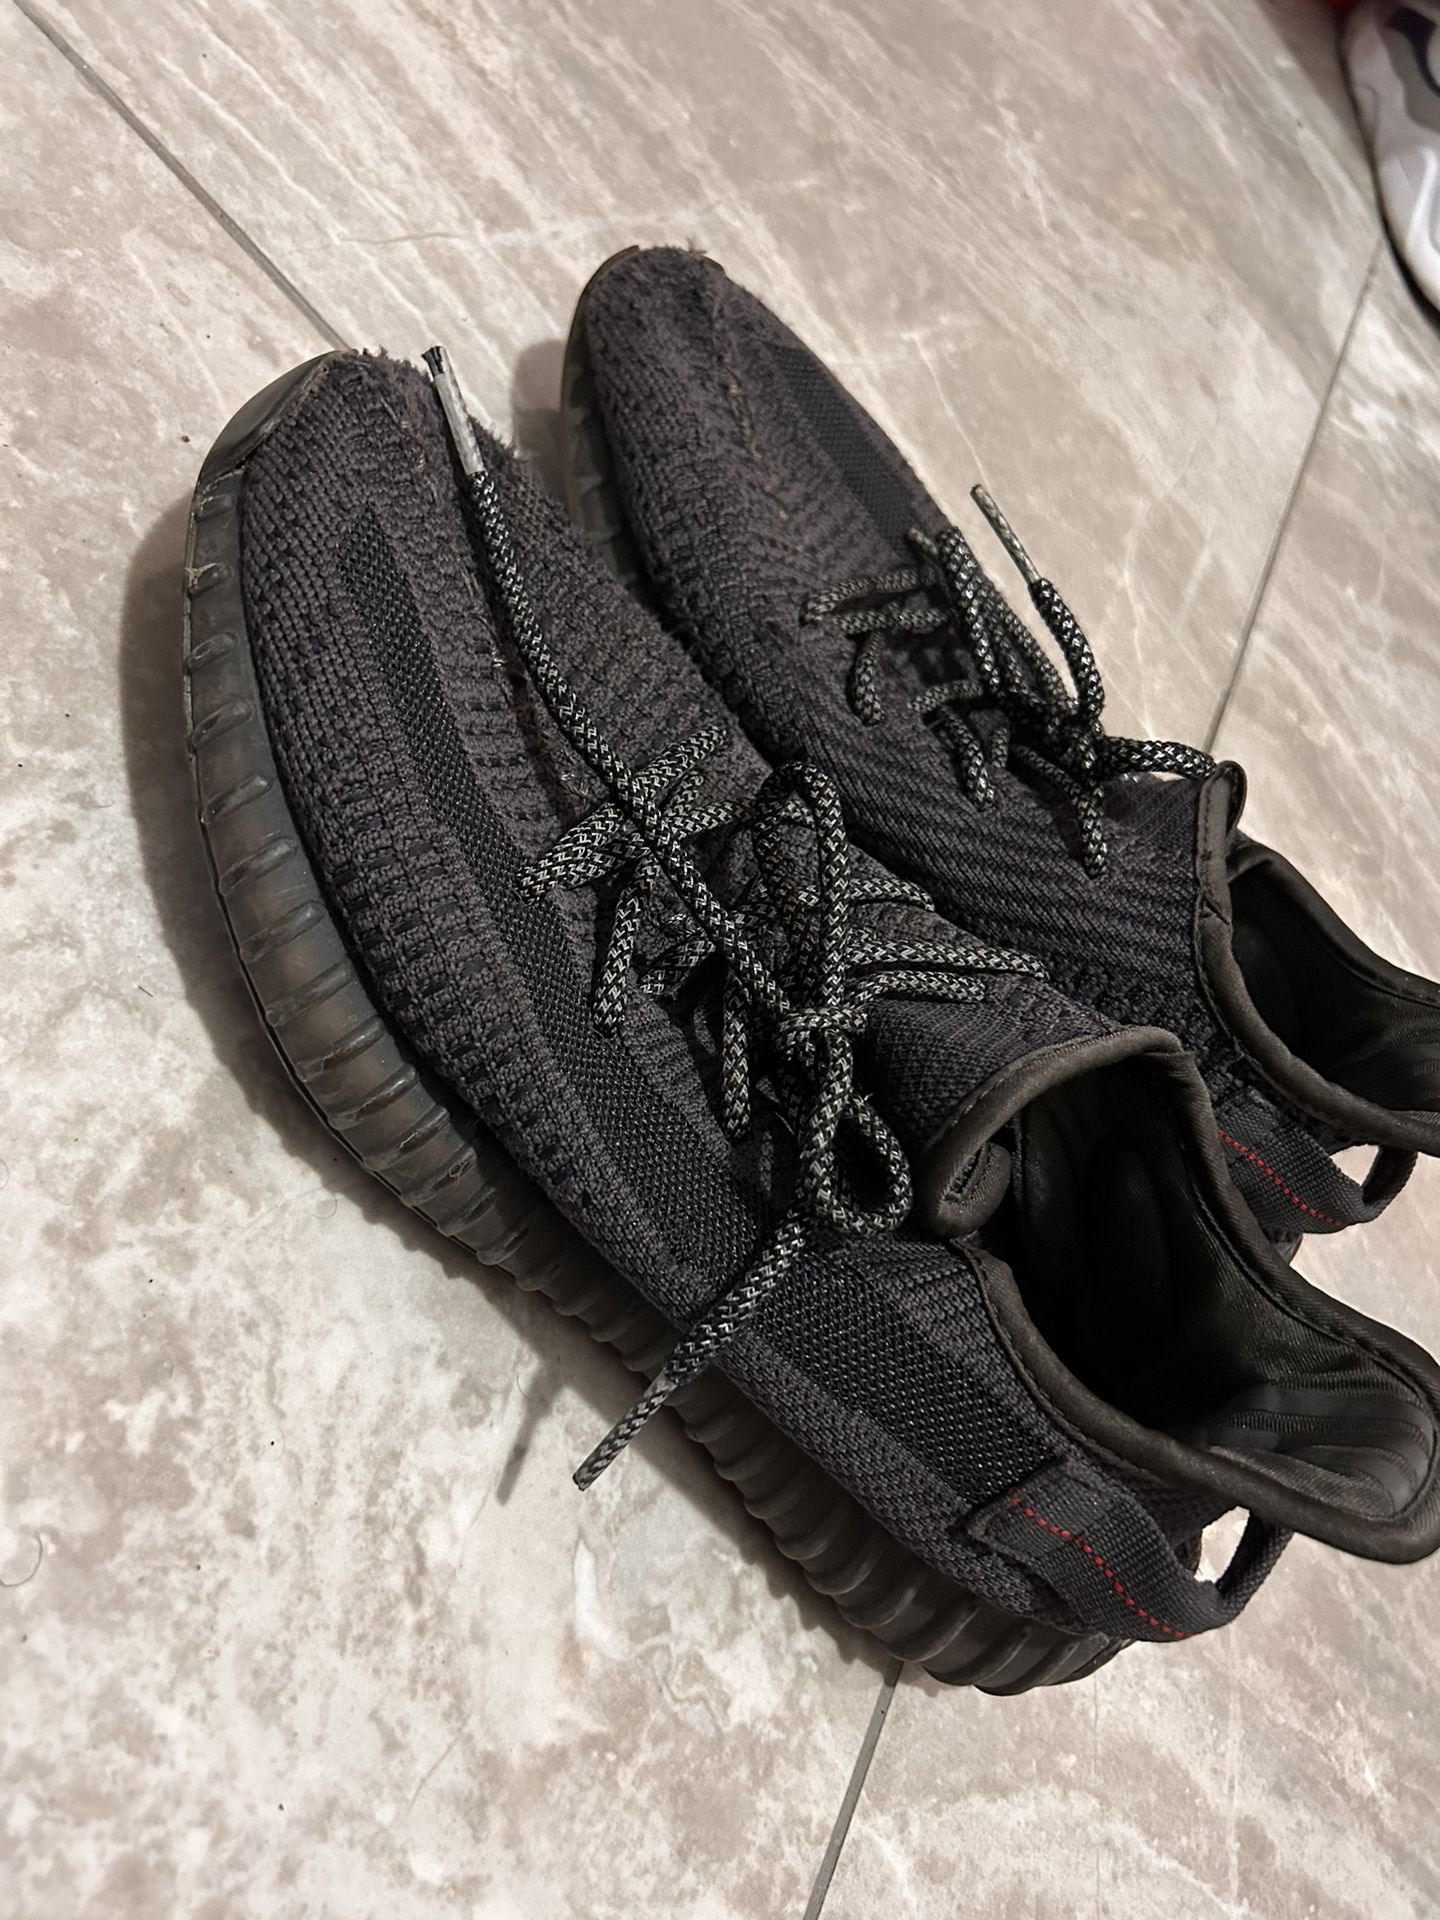 Adidas Yeezy Boost 350 V2 Size Men's US 9.5 USED